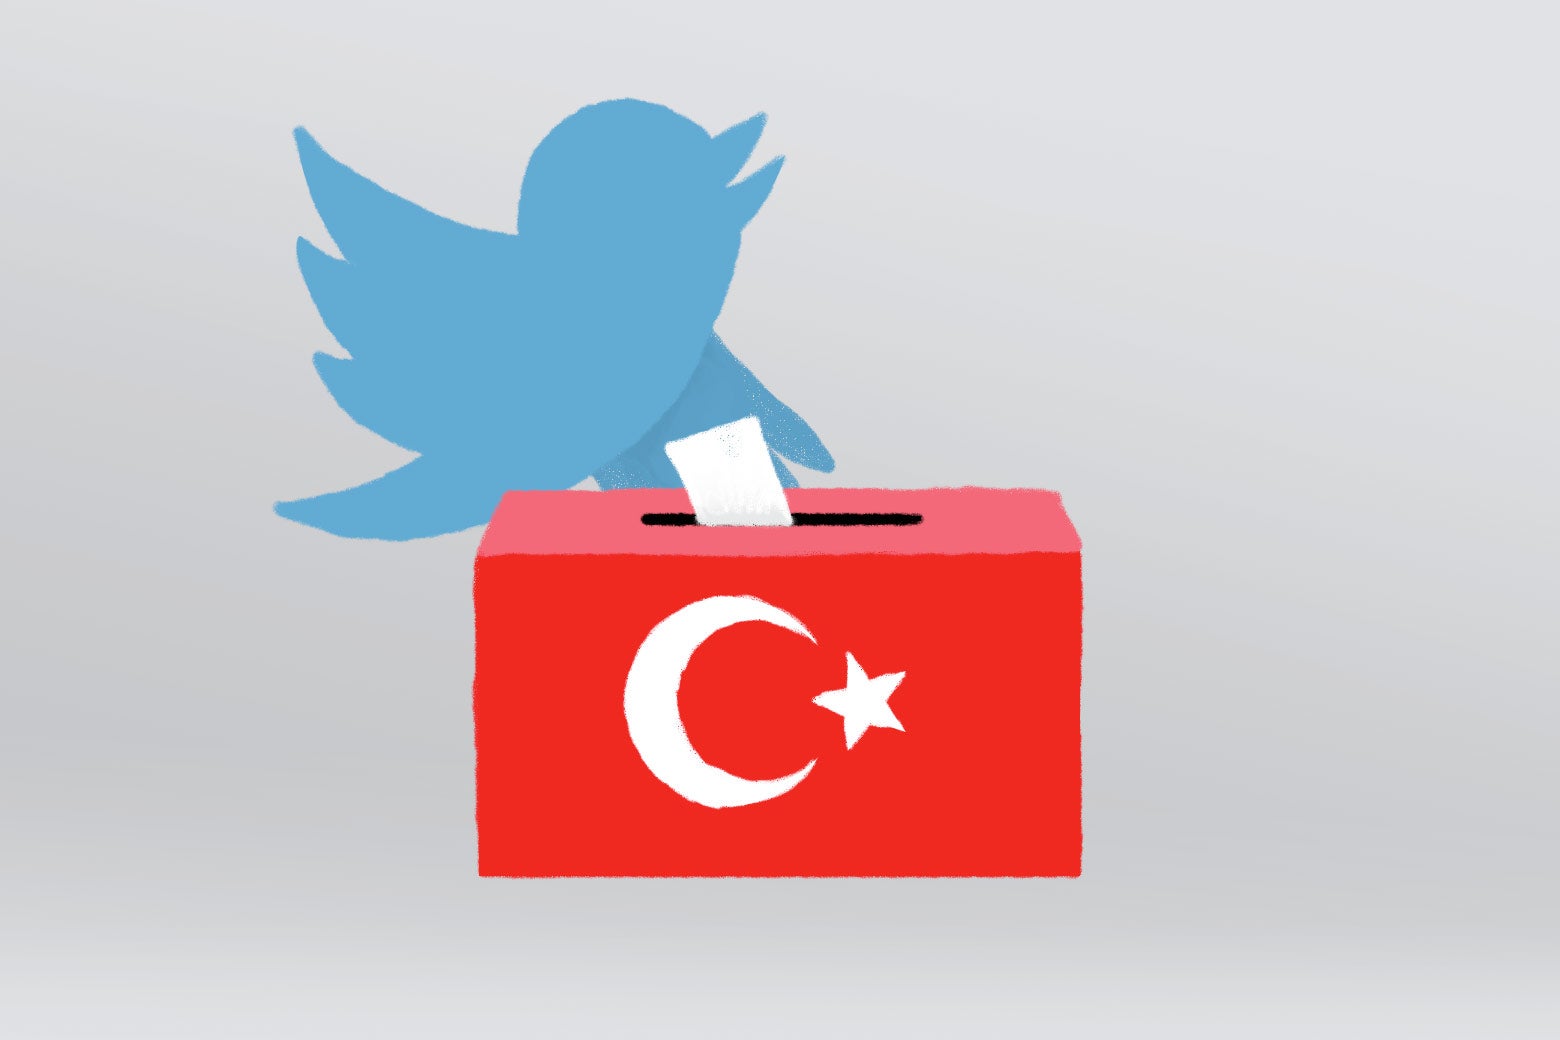 Turkey’s Government Has Blocked My Tweets. Elon Musk Doesn’t Know What He’s Supporting.